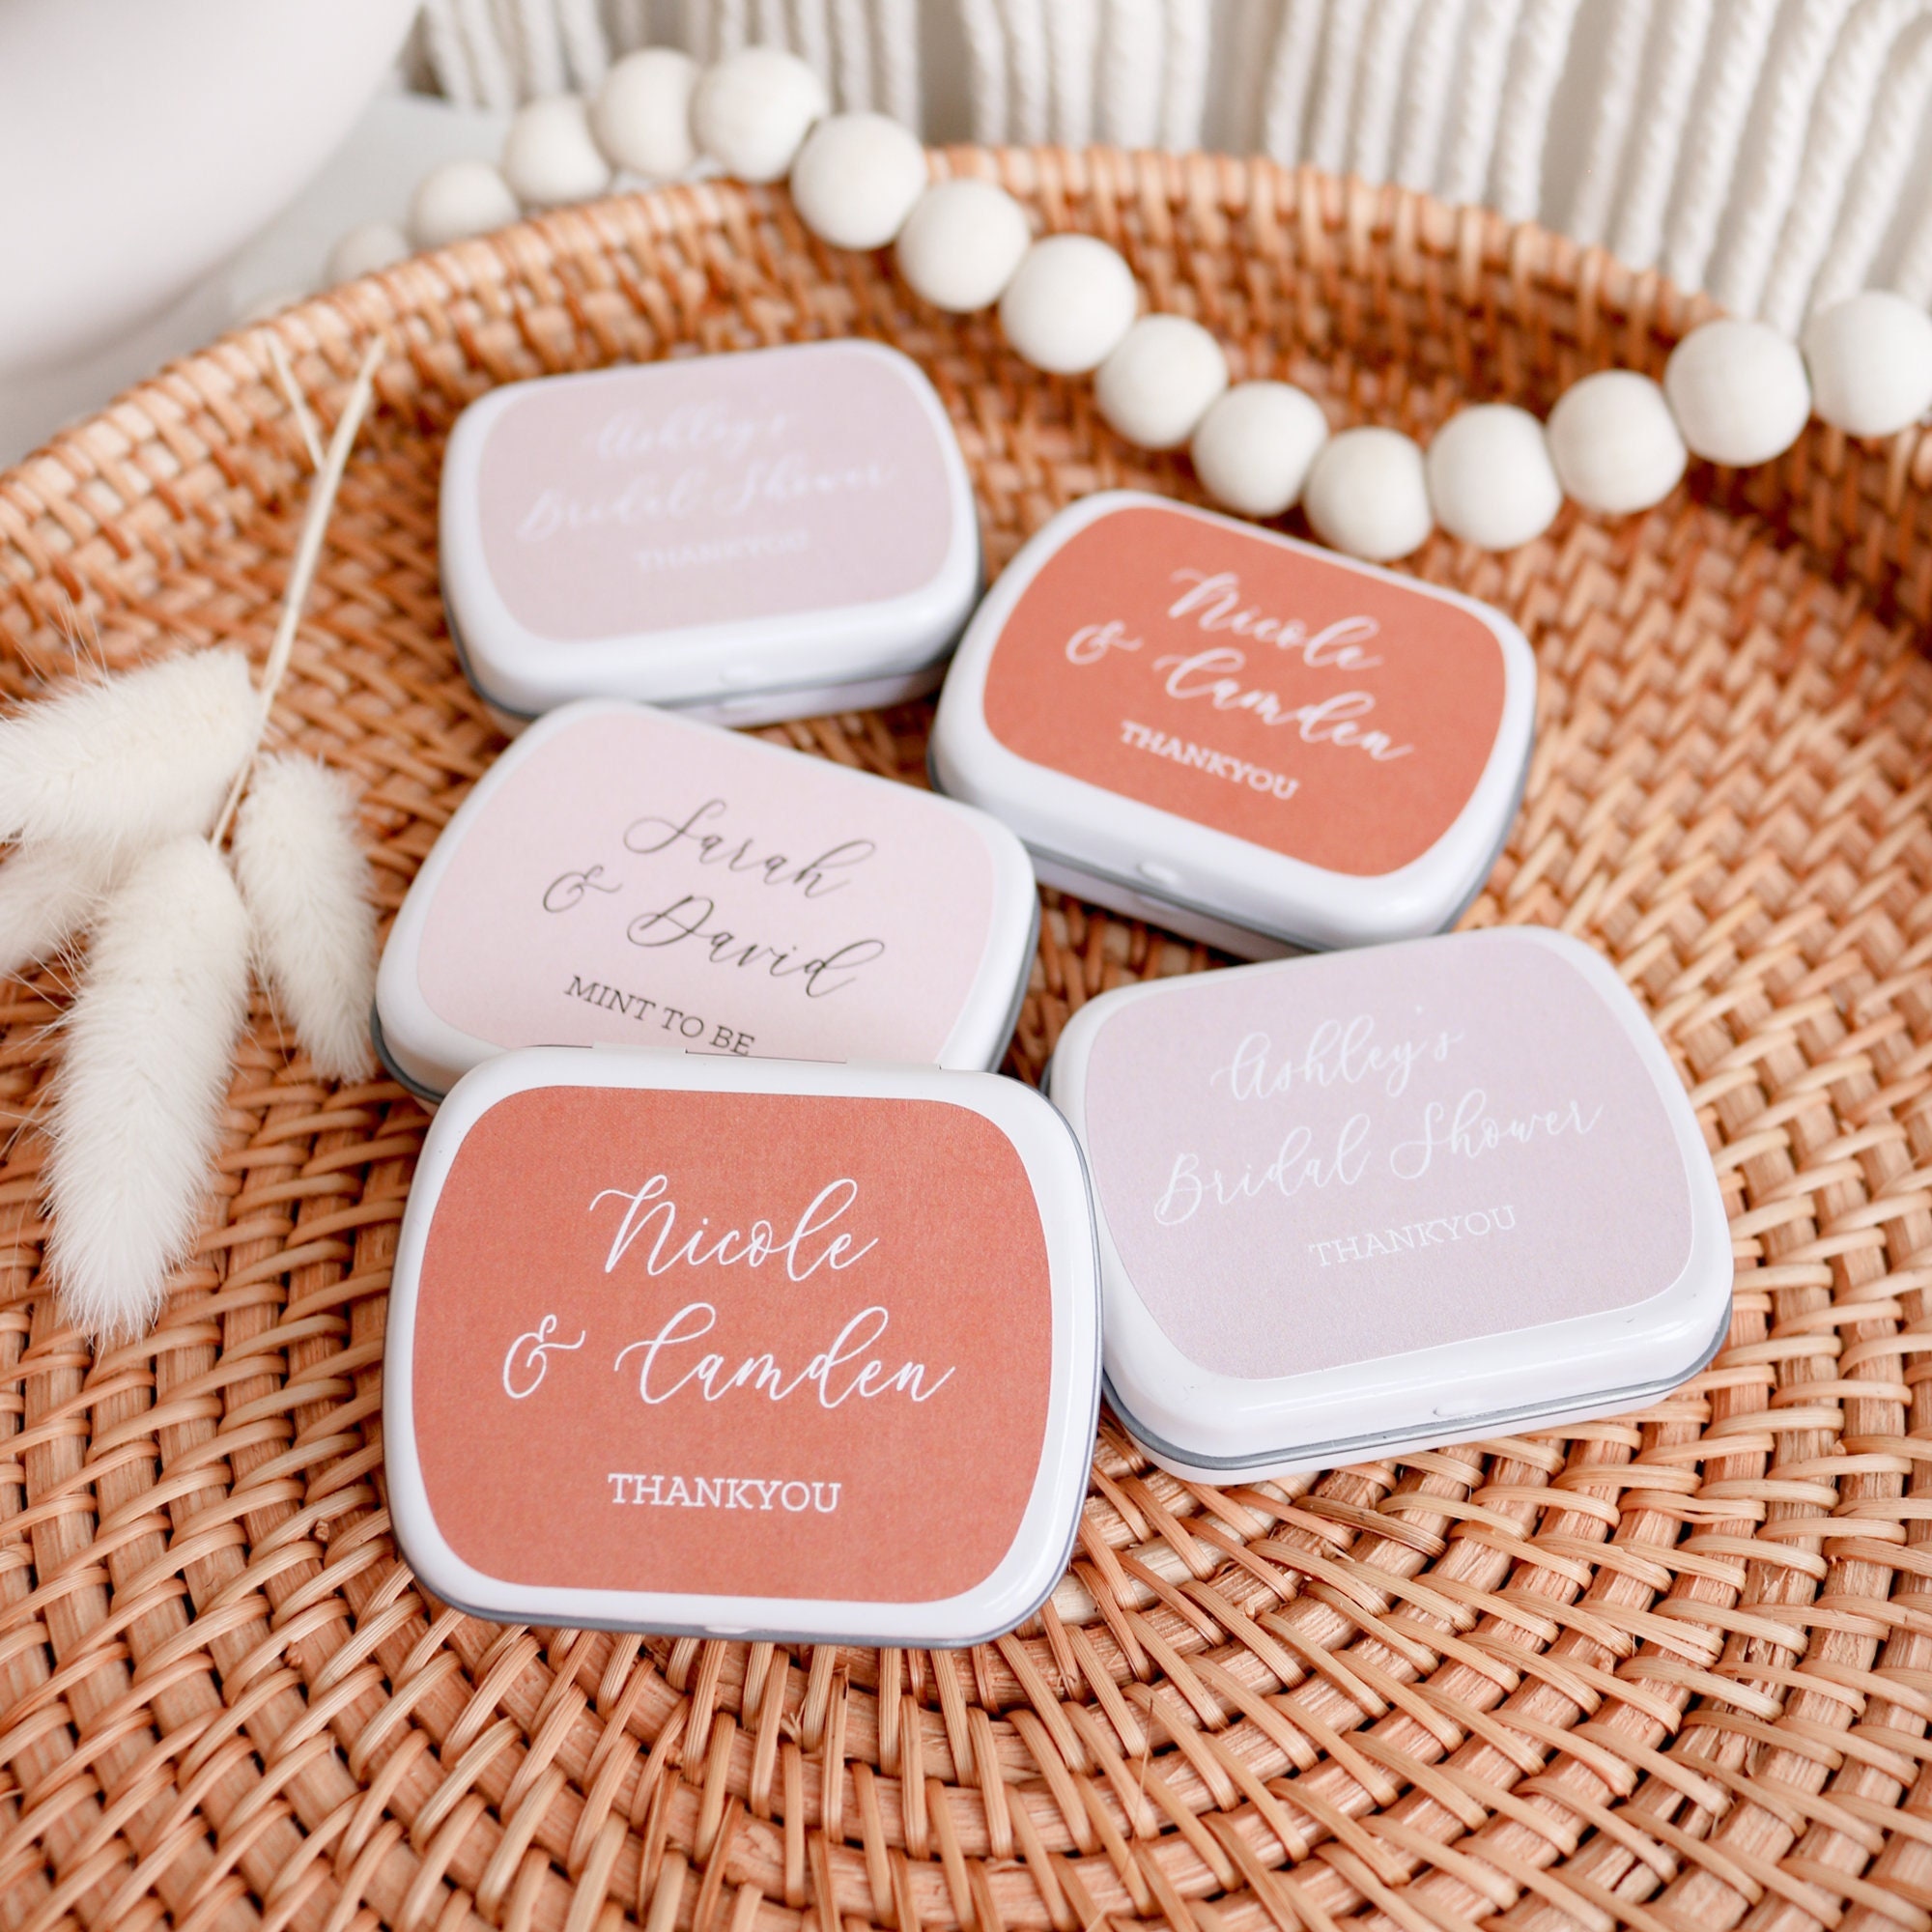 Personalized 12 Pcs Mint To Be Together Mint Tins, White Mint Tin  Containers with Labels Favors, Wedding Empty Mint Tin Favors